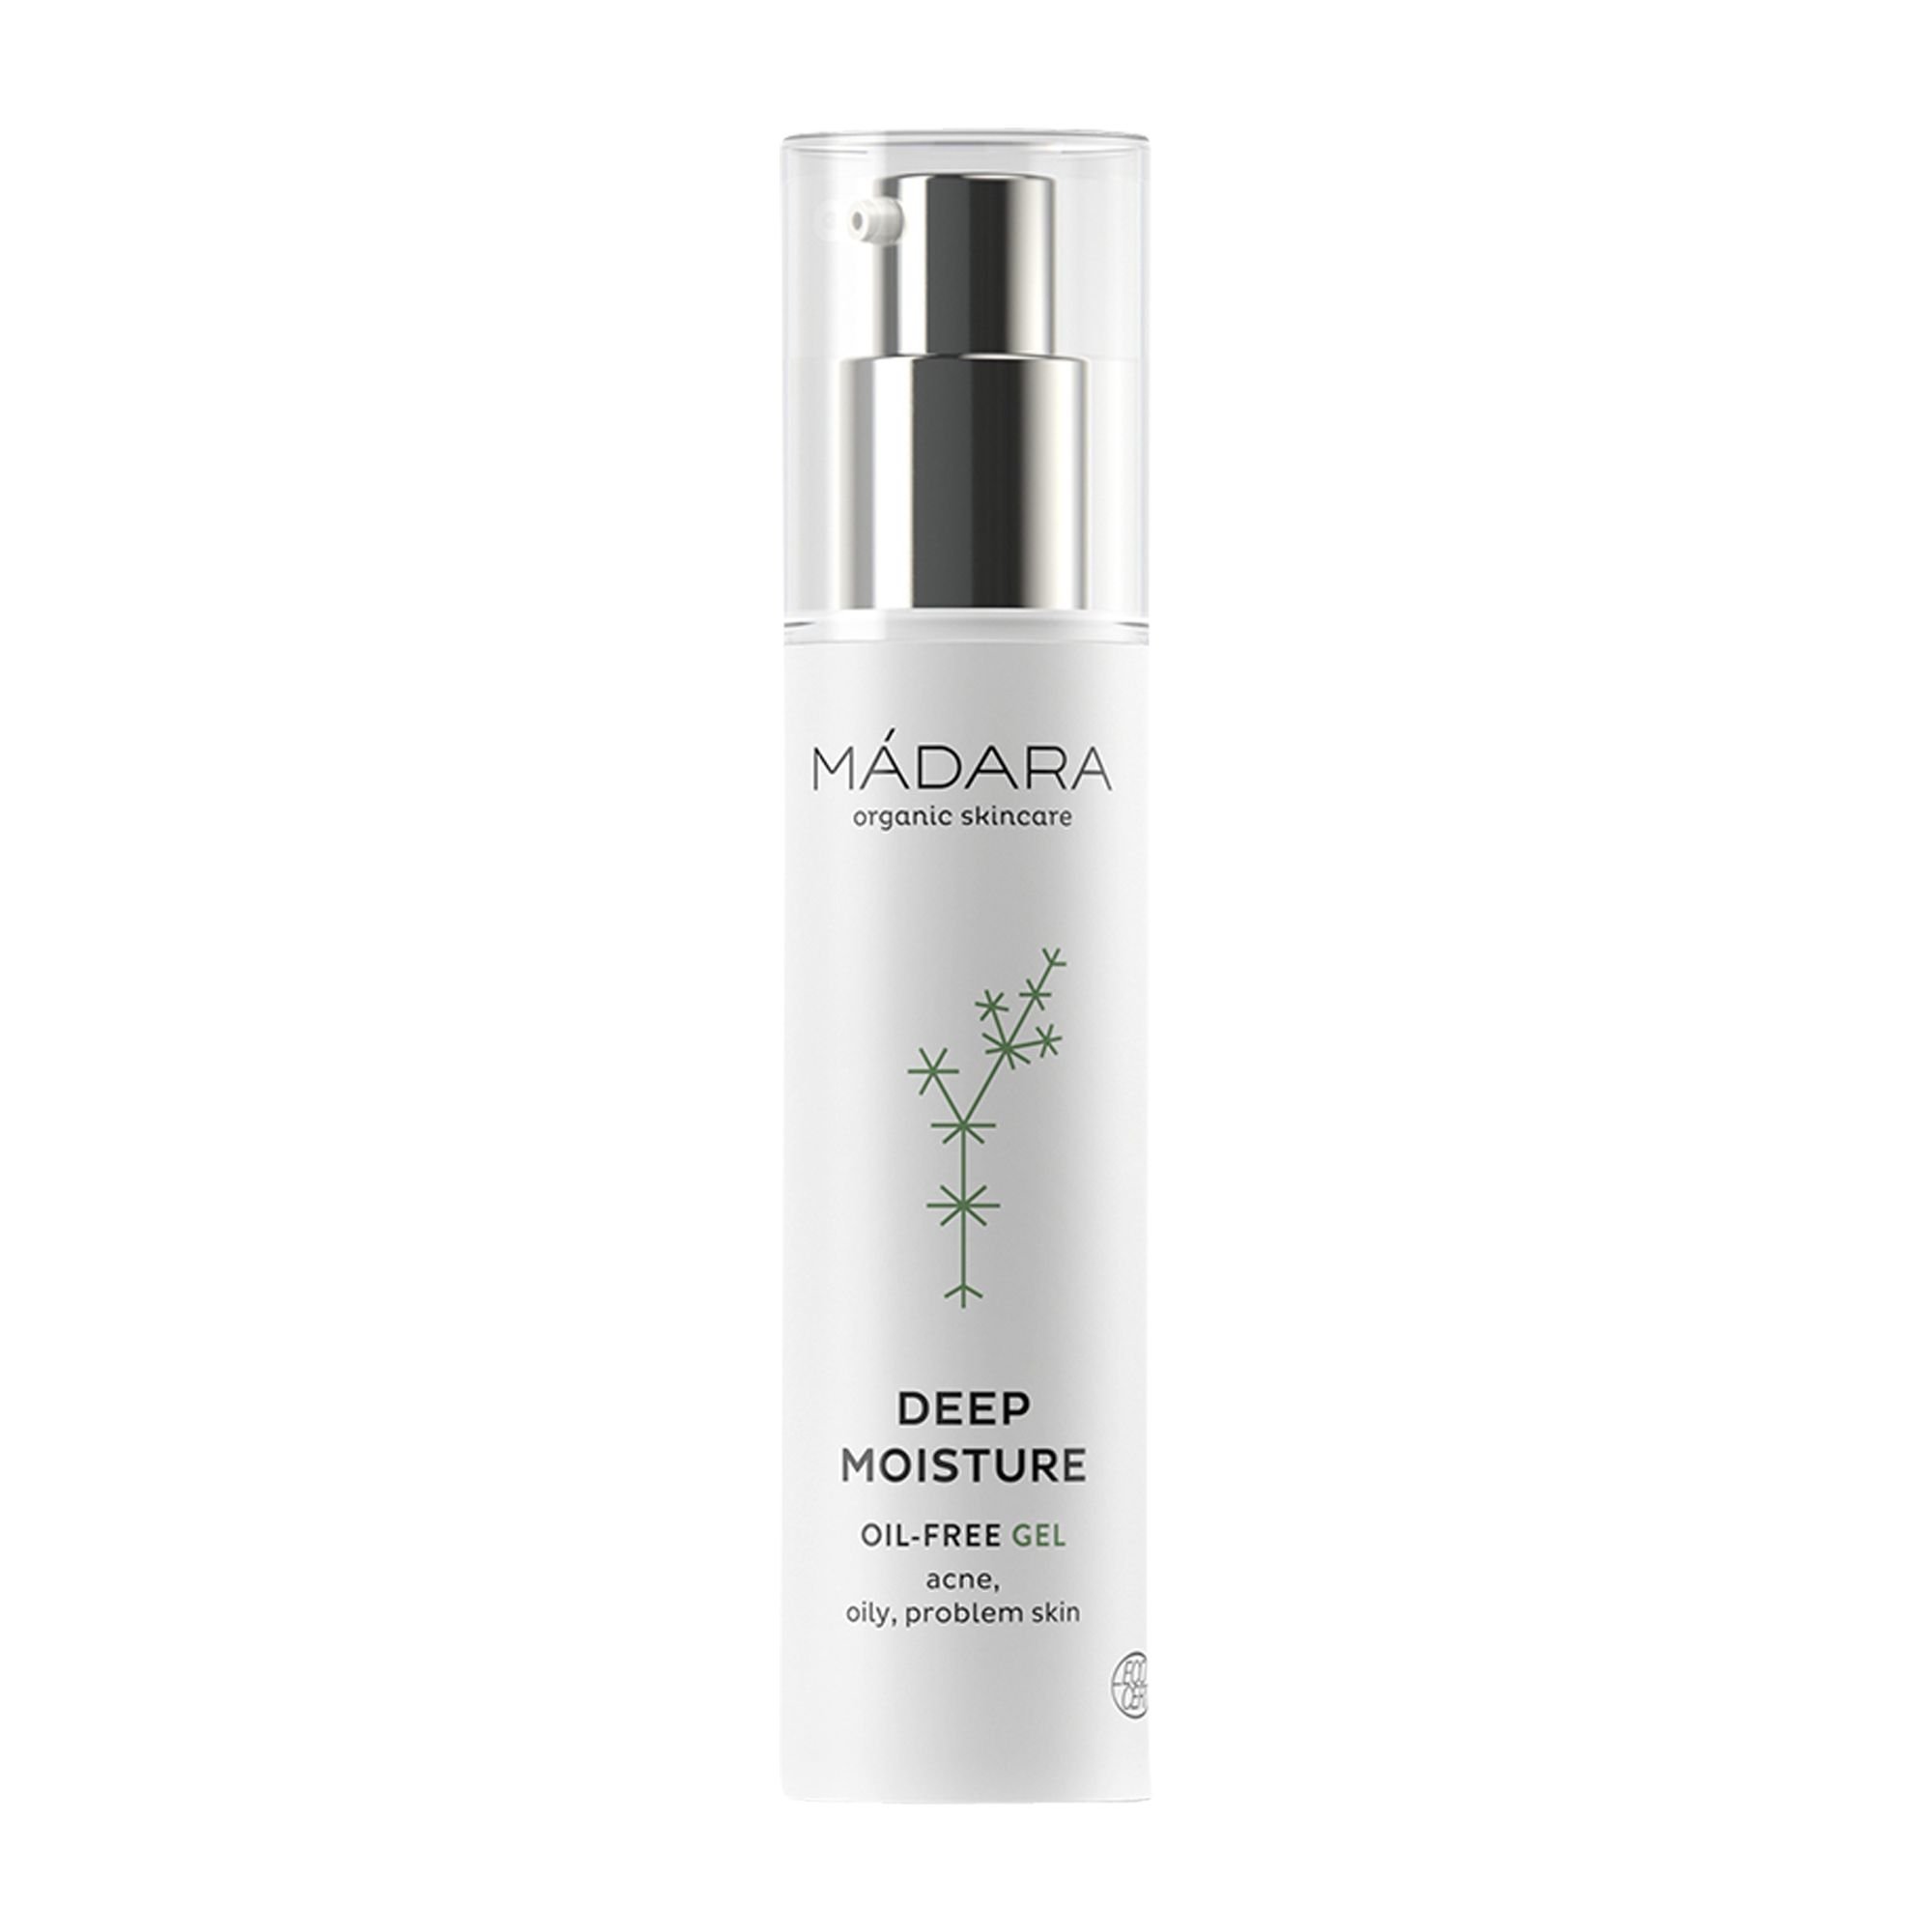 Mádara - Time Miracle Hydra Firm Hyaluron Concentrate Jelly Serum 75 ml